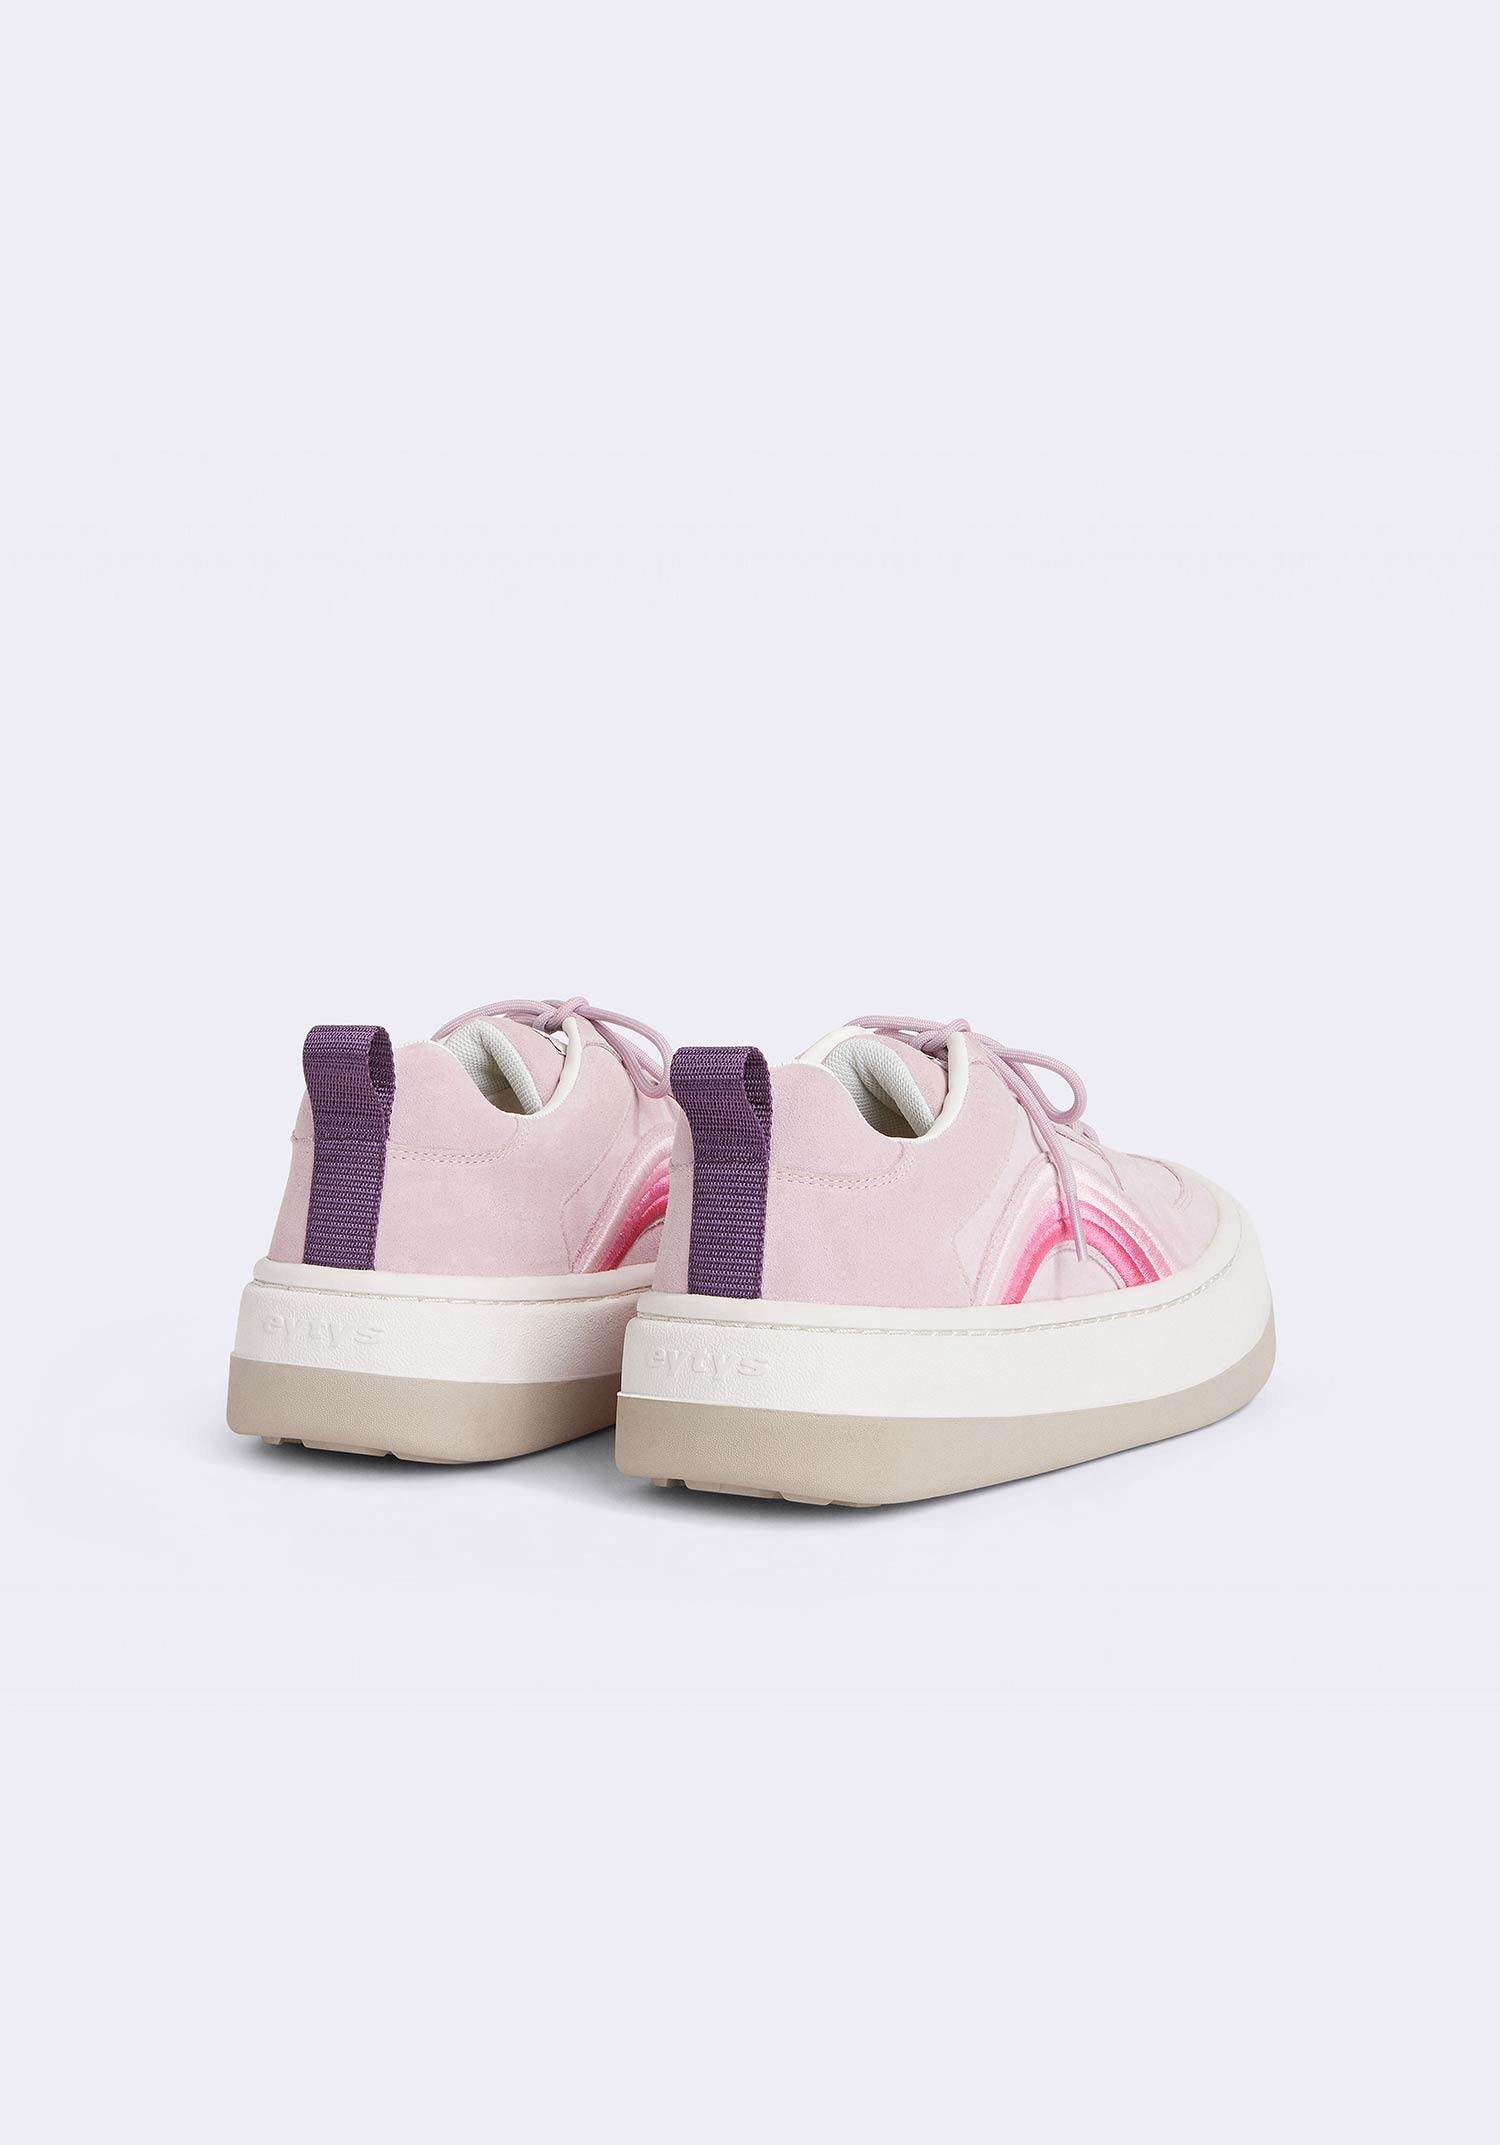 EYTYS Sonic Orchid Ice Sneakers | EYTYS